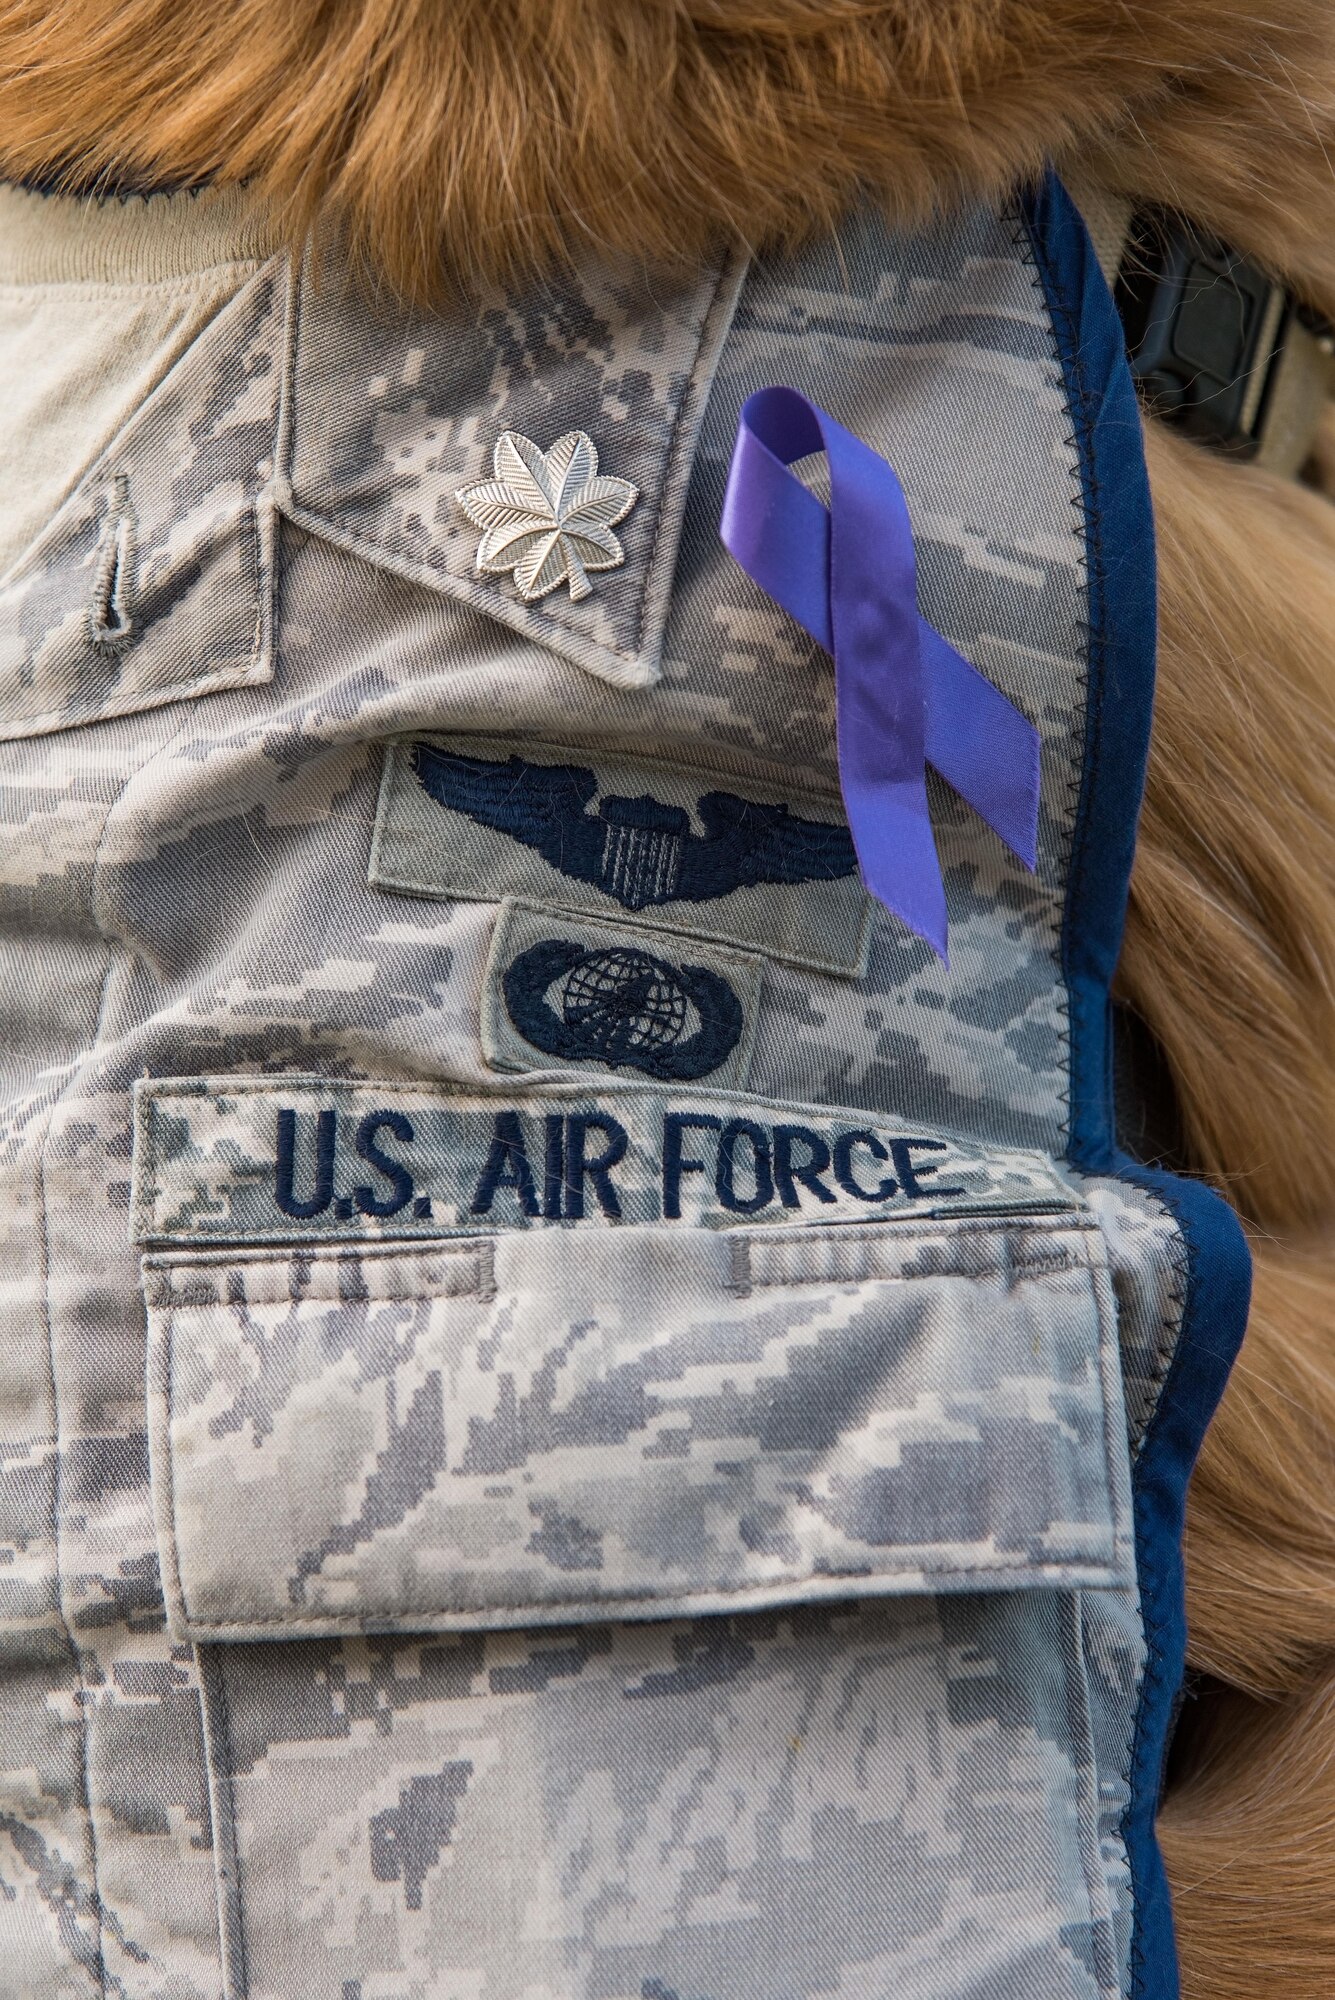 Lt. Col. Goldie wears his custom-made Airman Battle Uniform vest donning silver oak leaf clusters, Oct. 19, 2017, on Dover Air Force Base, Del. Goldie was promoted to his current rank by the Air Force Thunderbirds in September during the 2017 Joint Base Andrews, Md., air show. The purple ribbon worn on his ABU vest is in support of Domestic Violence Awareness Month. (U.S. Air Force photo by Roland Balik)